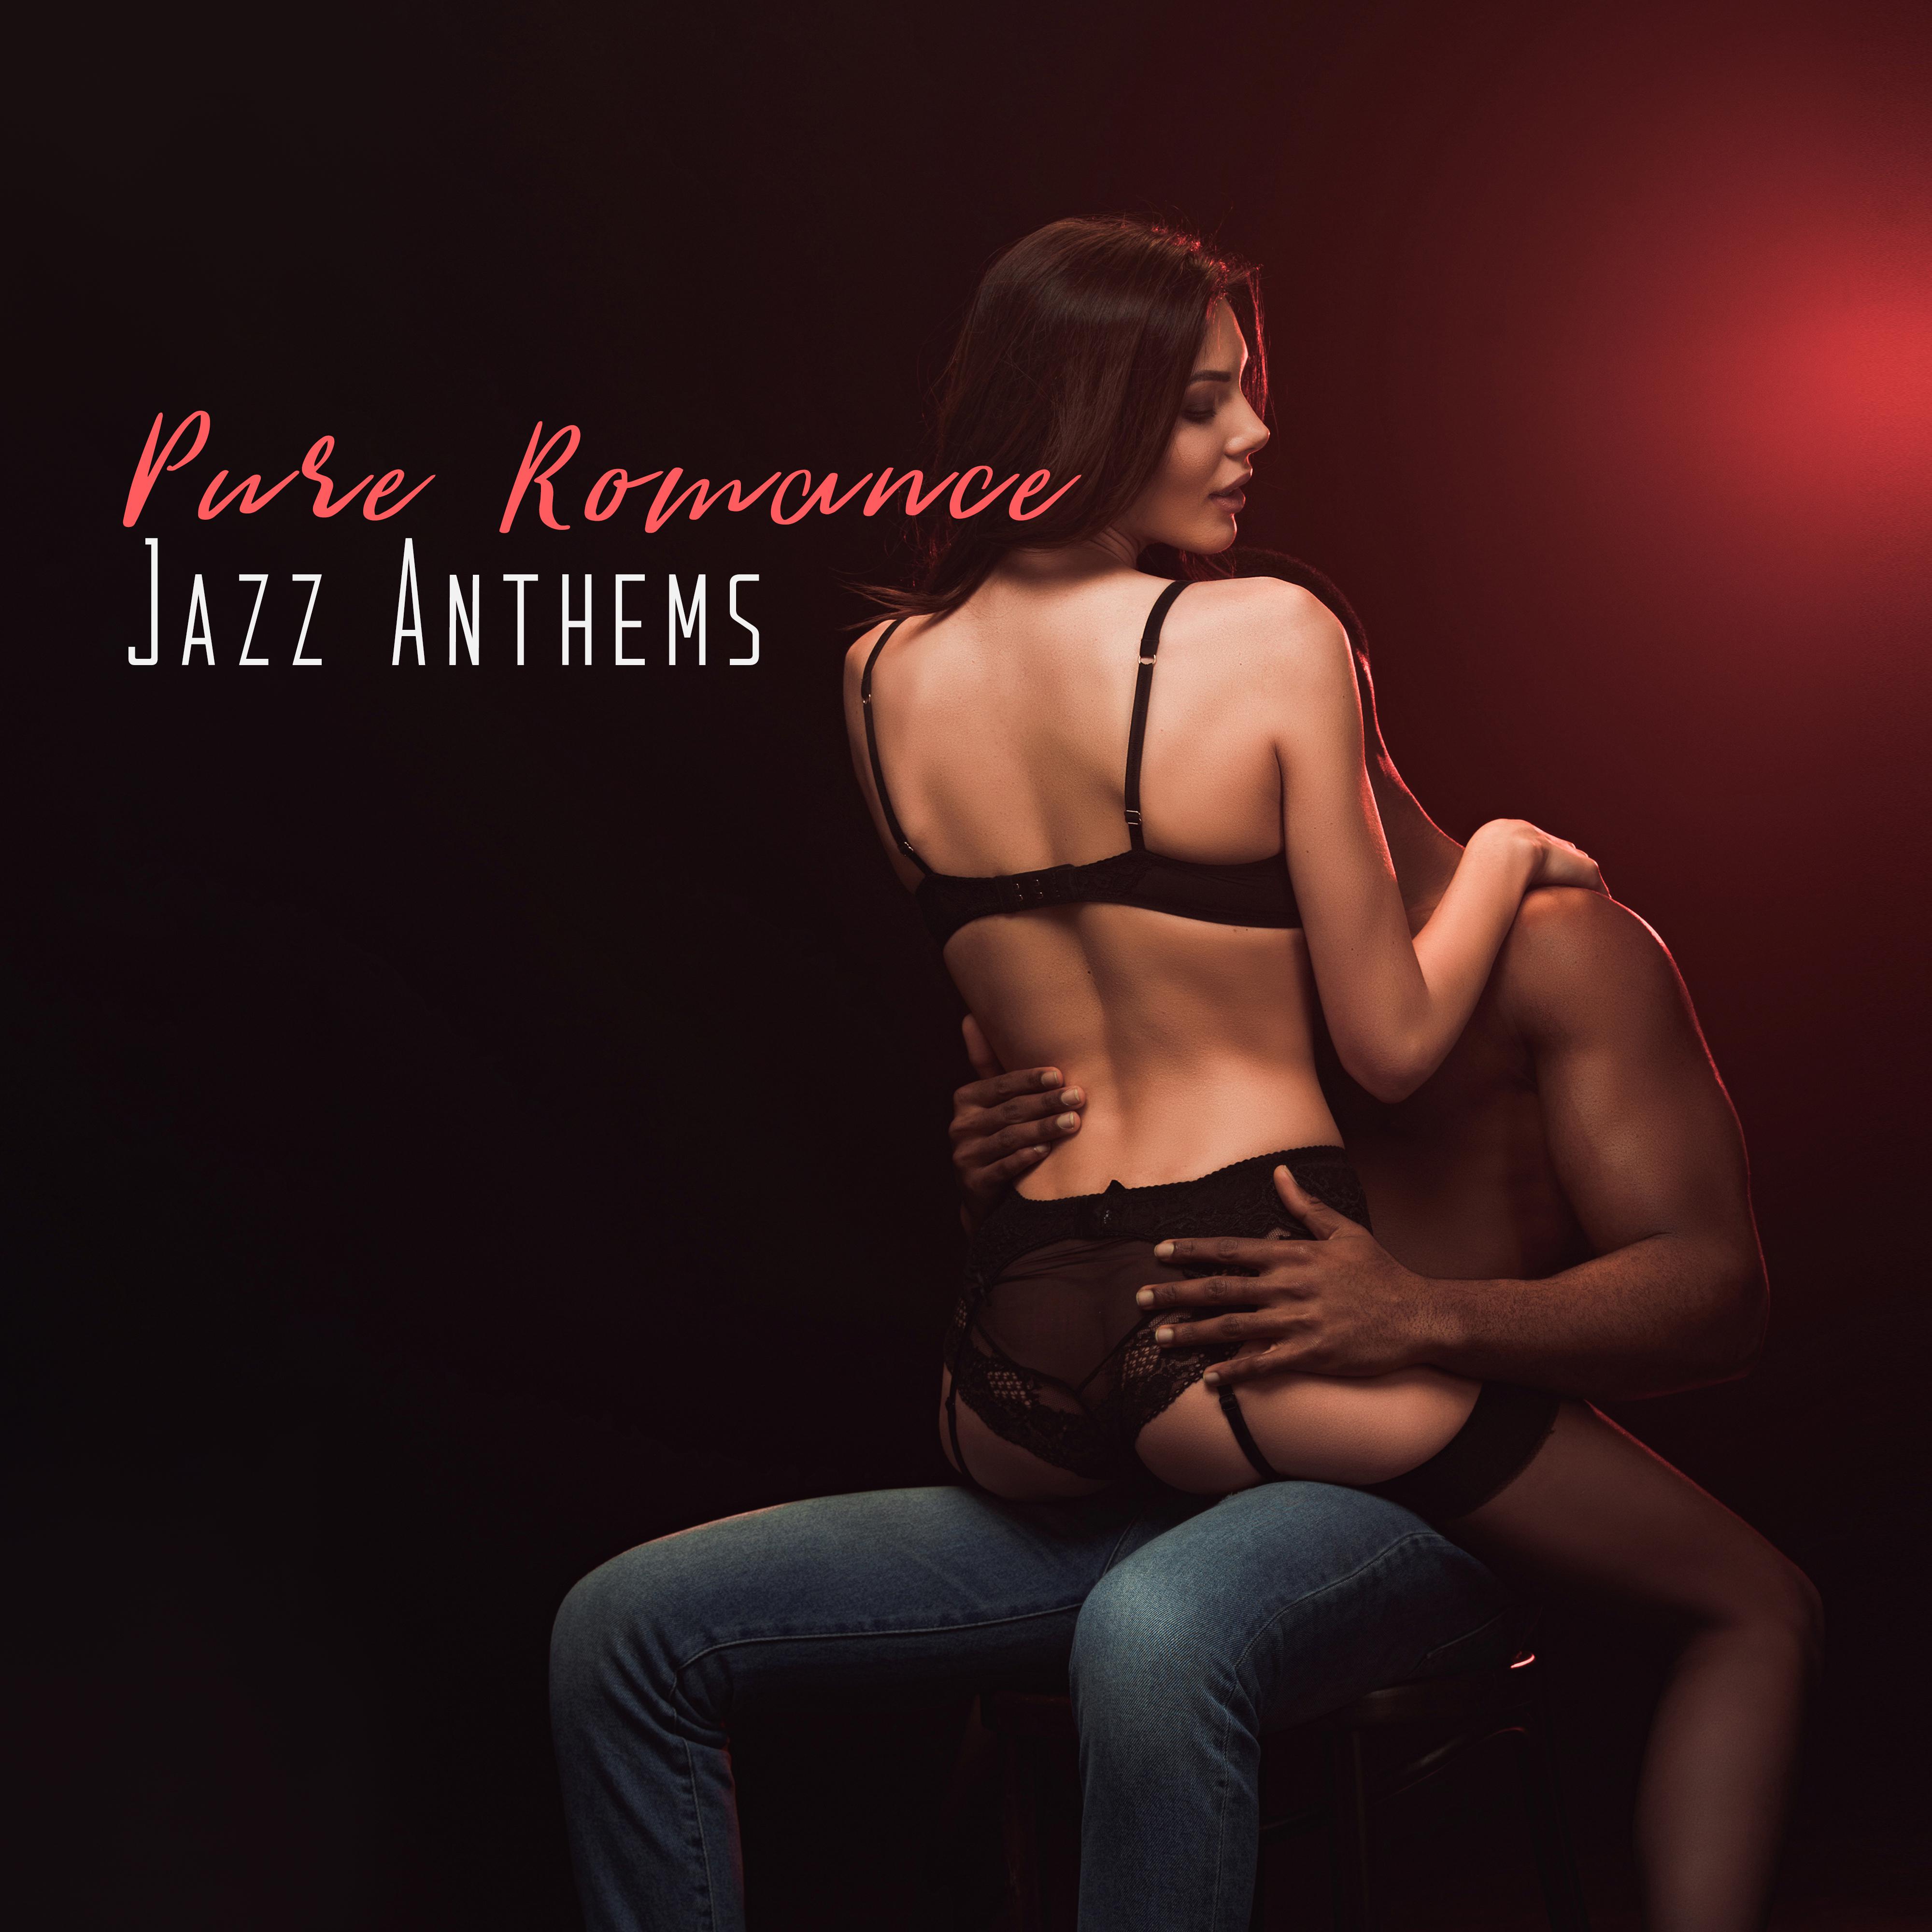 Pure Romance Jazz Anthems: 2019 Smooth Jazz Music Perfect for Romantic Date, Sensual Background Songs, Lovers Night Full of Love, Passion & ***